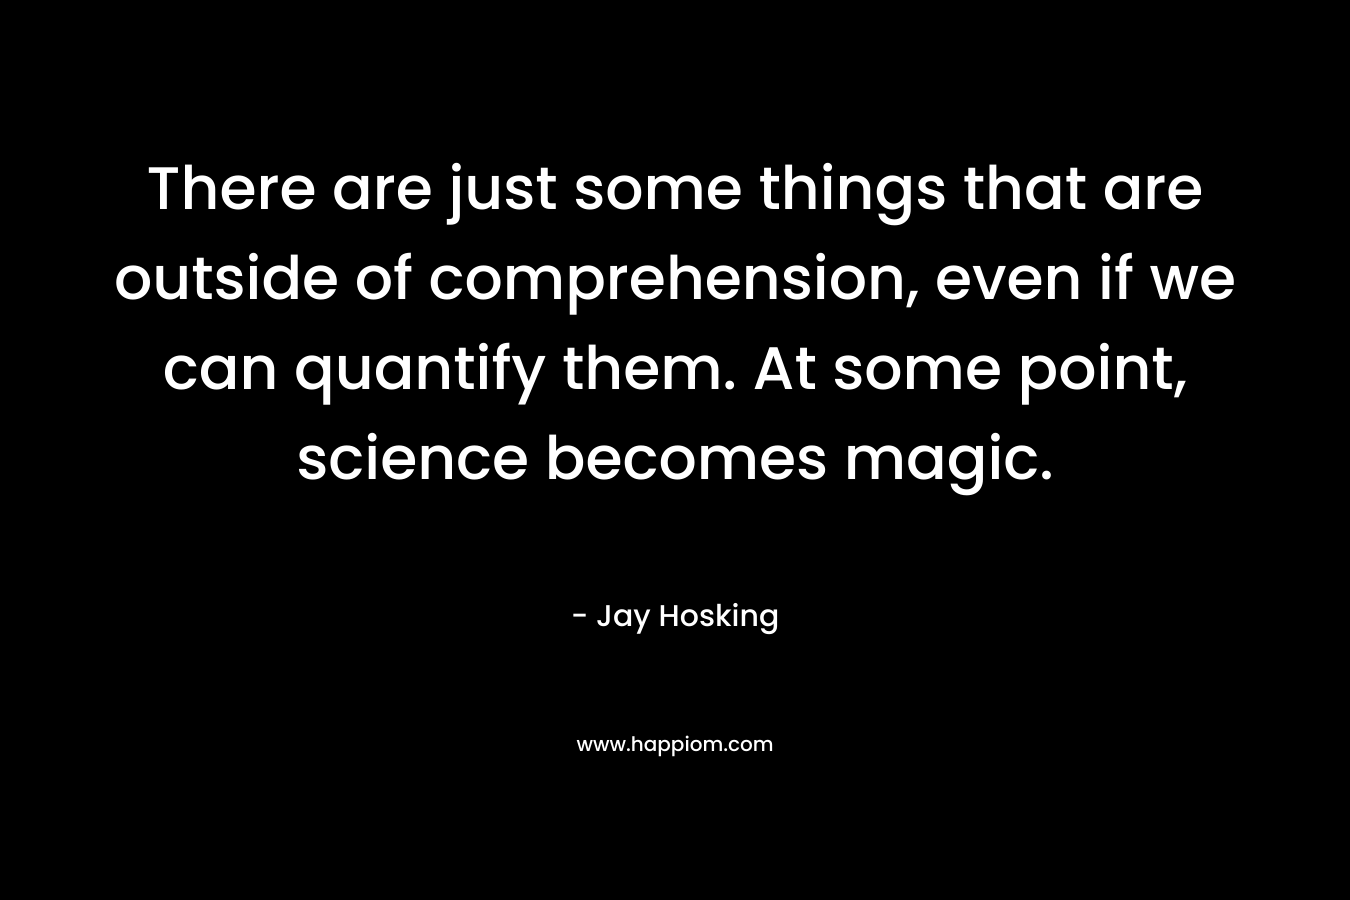 There are just some things that are outside of comprehension, even if we can quantify them. At some point, science becomes magic.